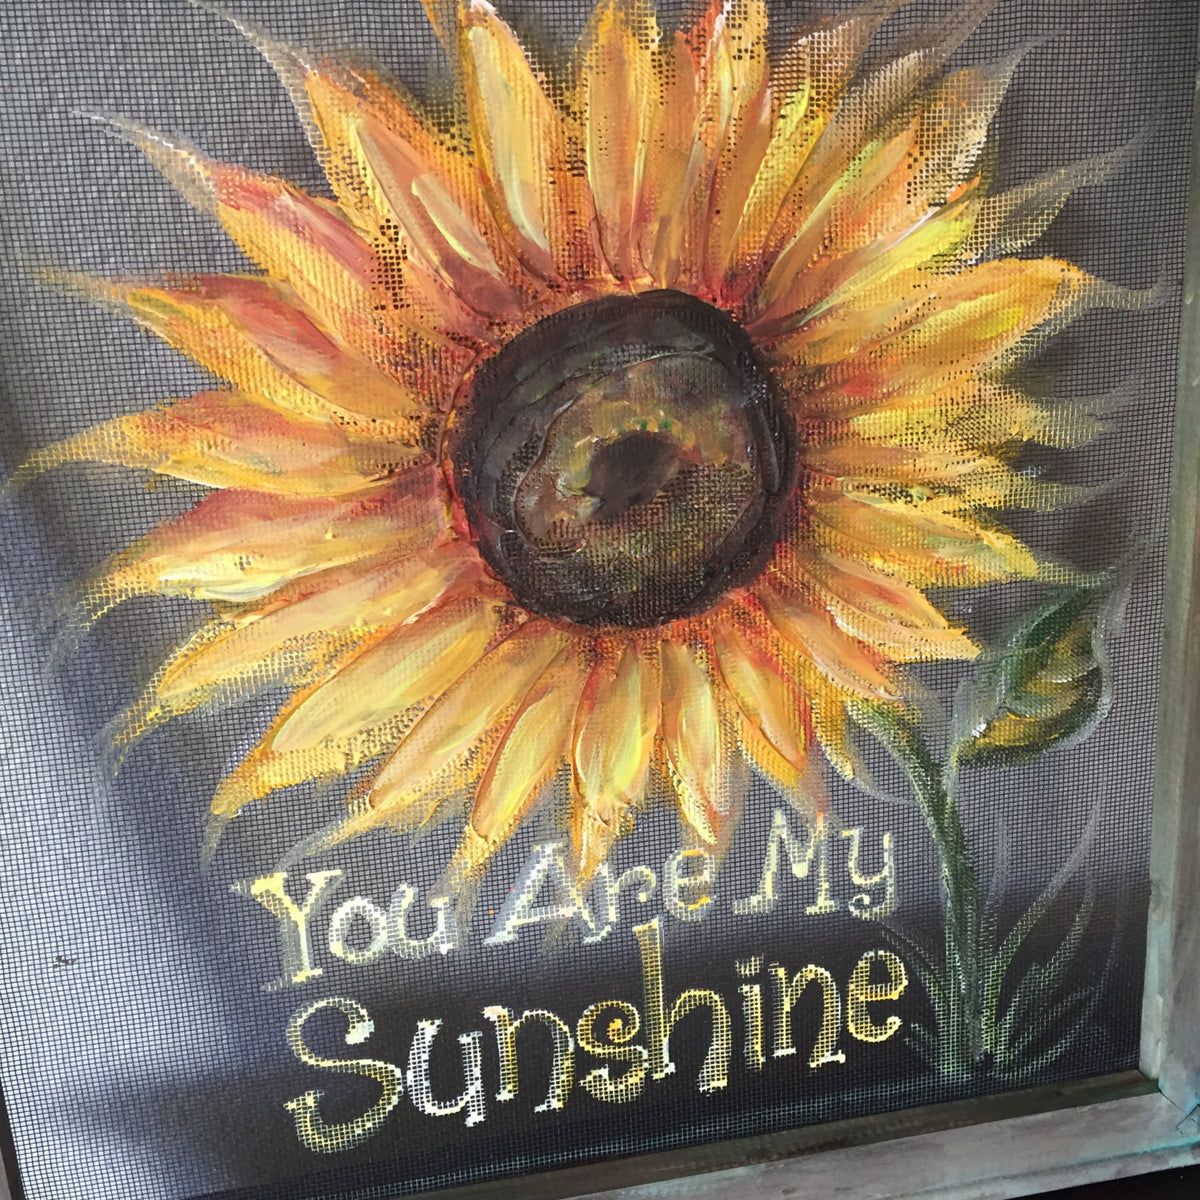 You Are My Sunshine Panda With Sunflower Motivational Water 